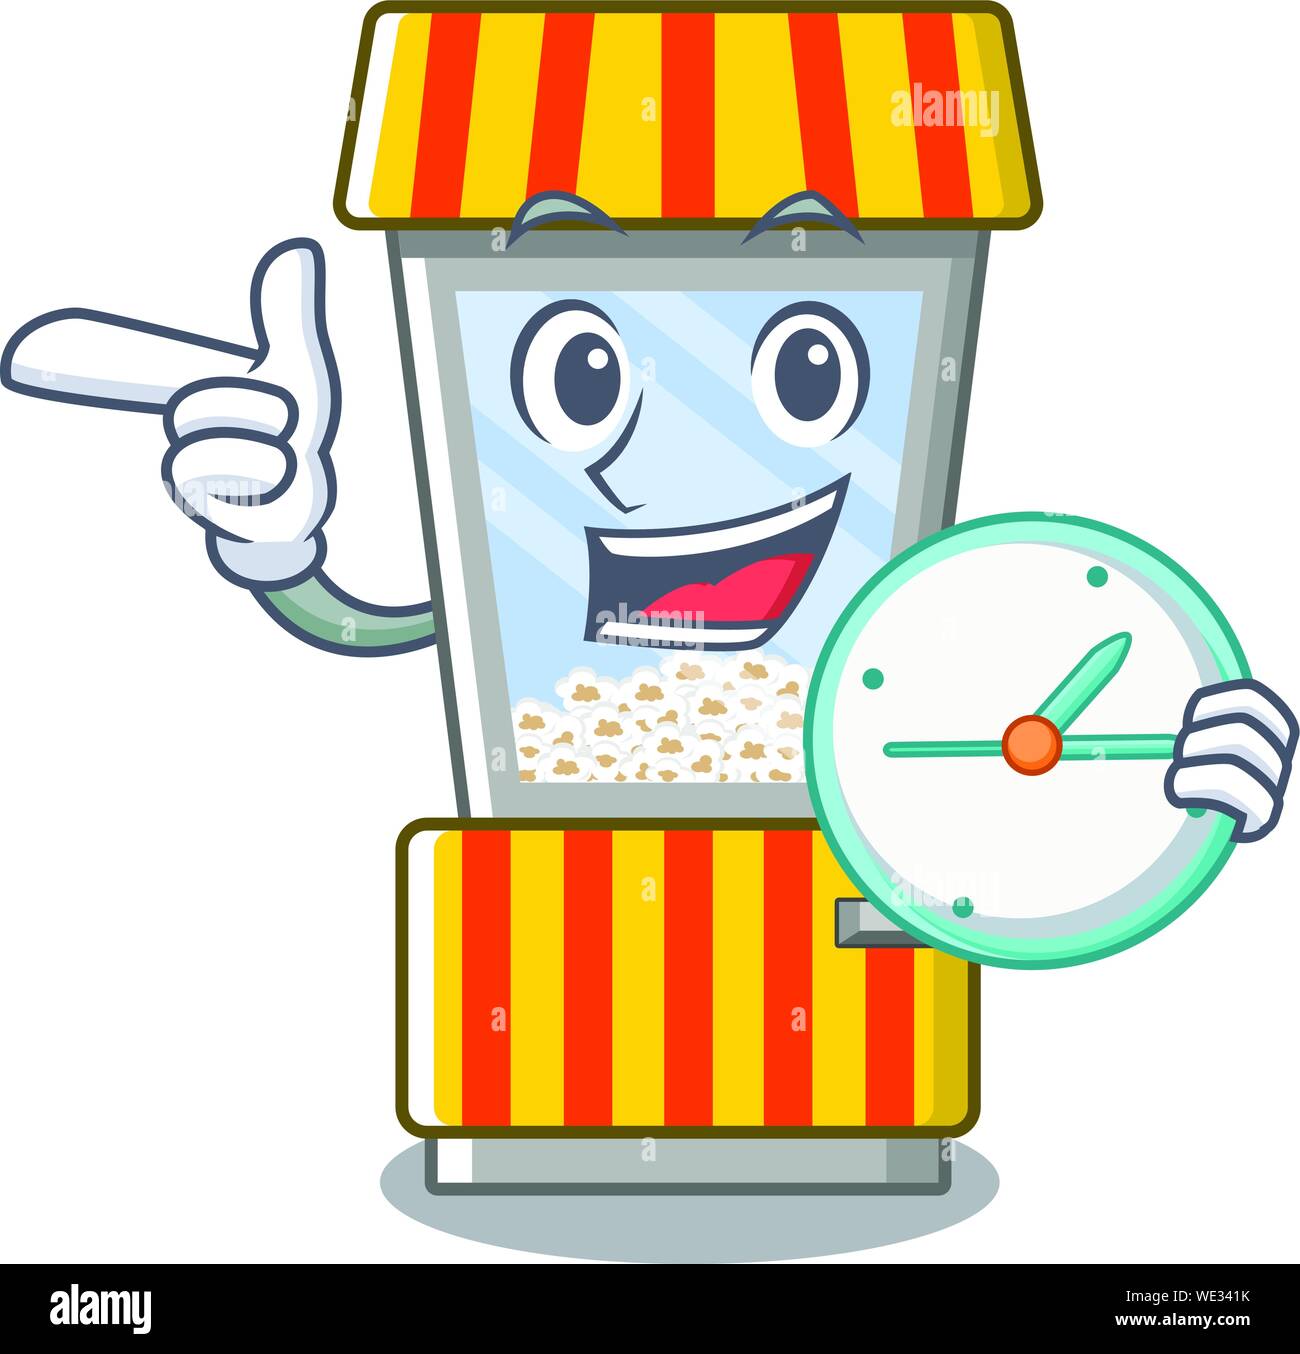 With clock popcorn vending machine in a character Stock Vector